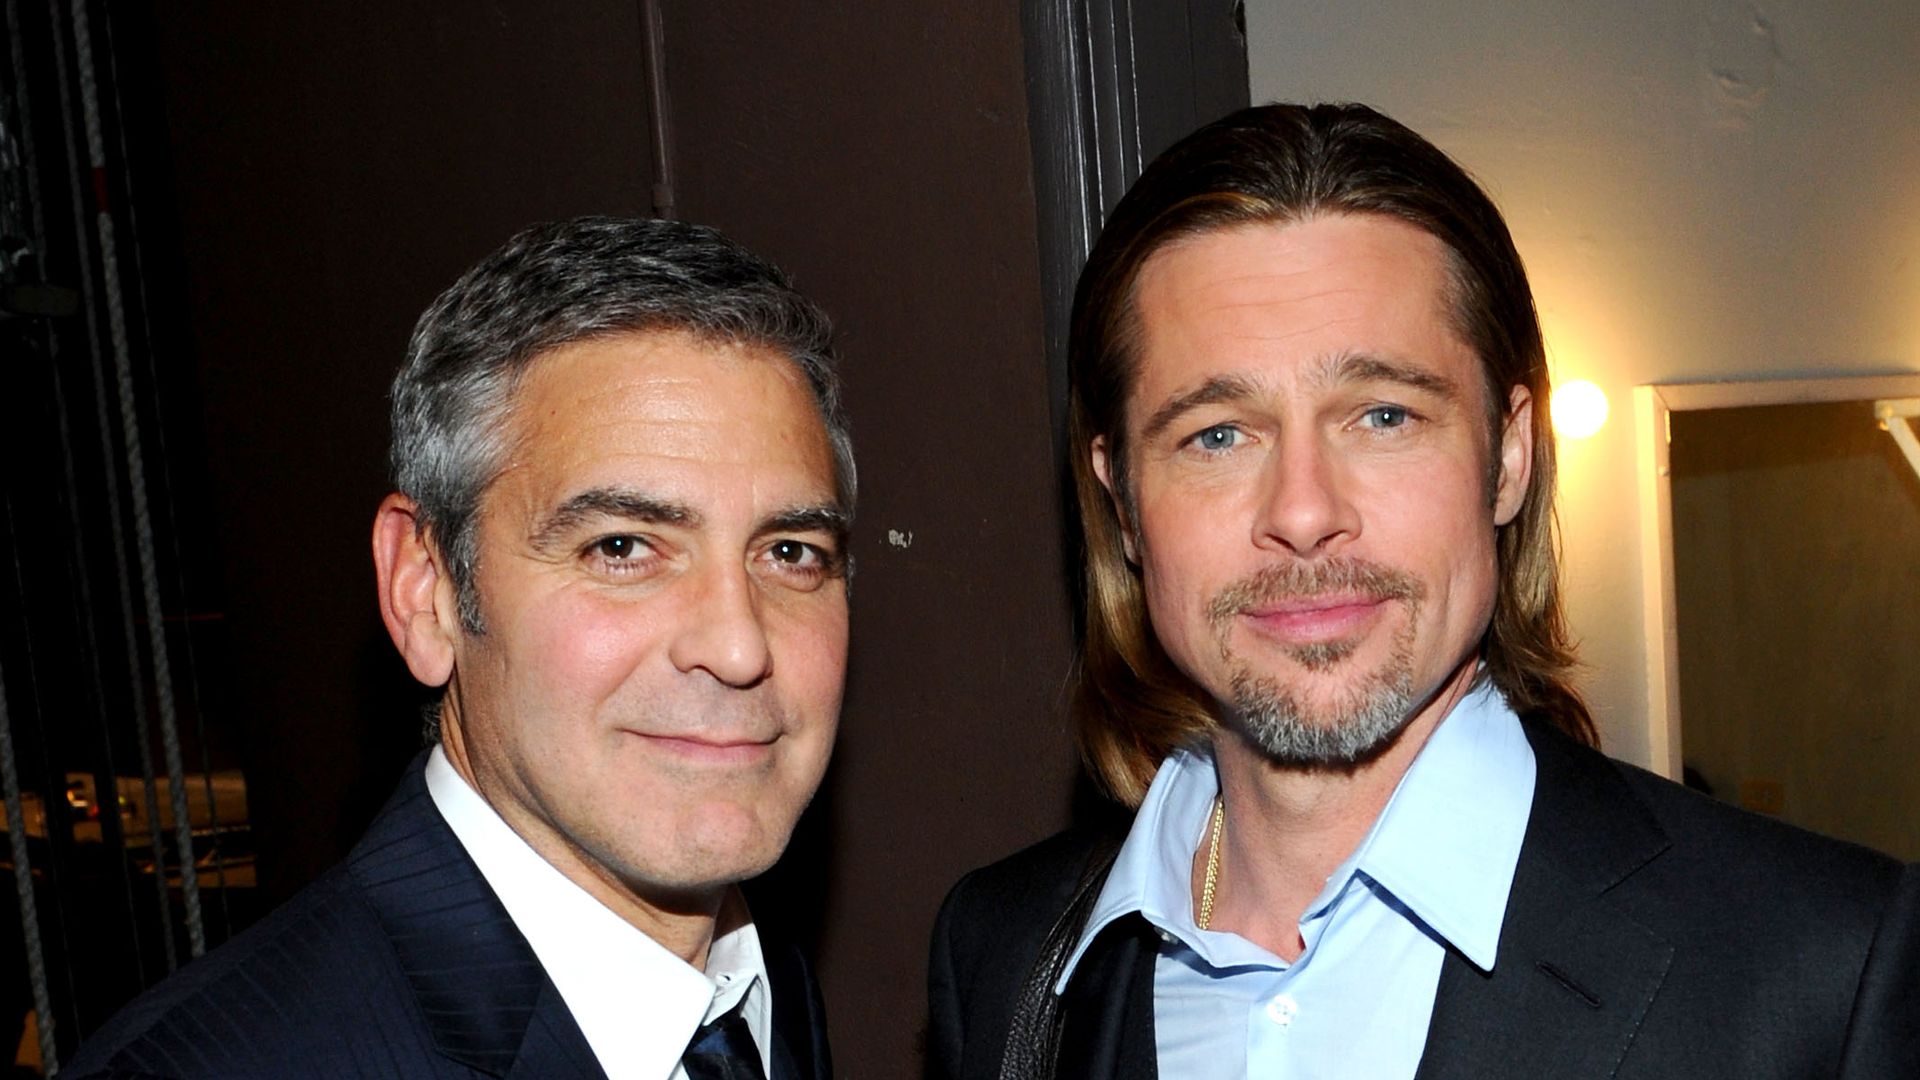 Actors Brad Pitt (L) and George Clooney attend the one-night reading of "8" presented by The American Foundation For Equal Rights & Broadway Impact at The Wilshire Ebell Theatre on March 3, 2012 in Los Angeles, California